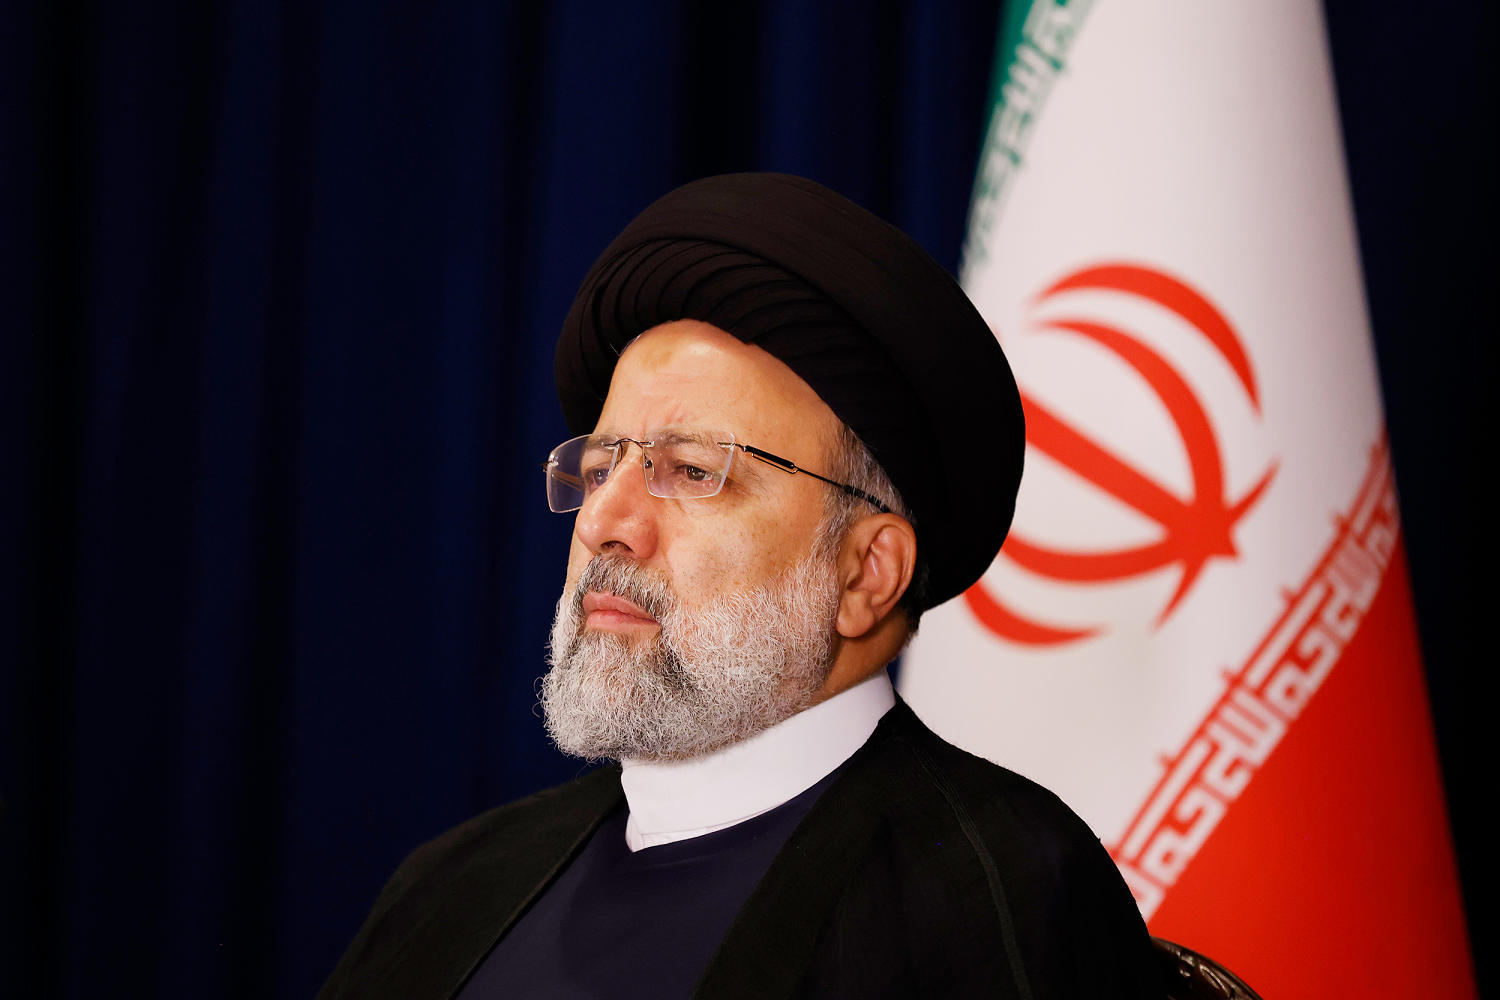 Helicopter carrying Iran’s president suffers a ‘crash,’ state TV says without further details